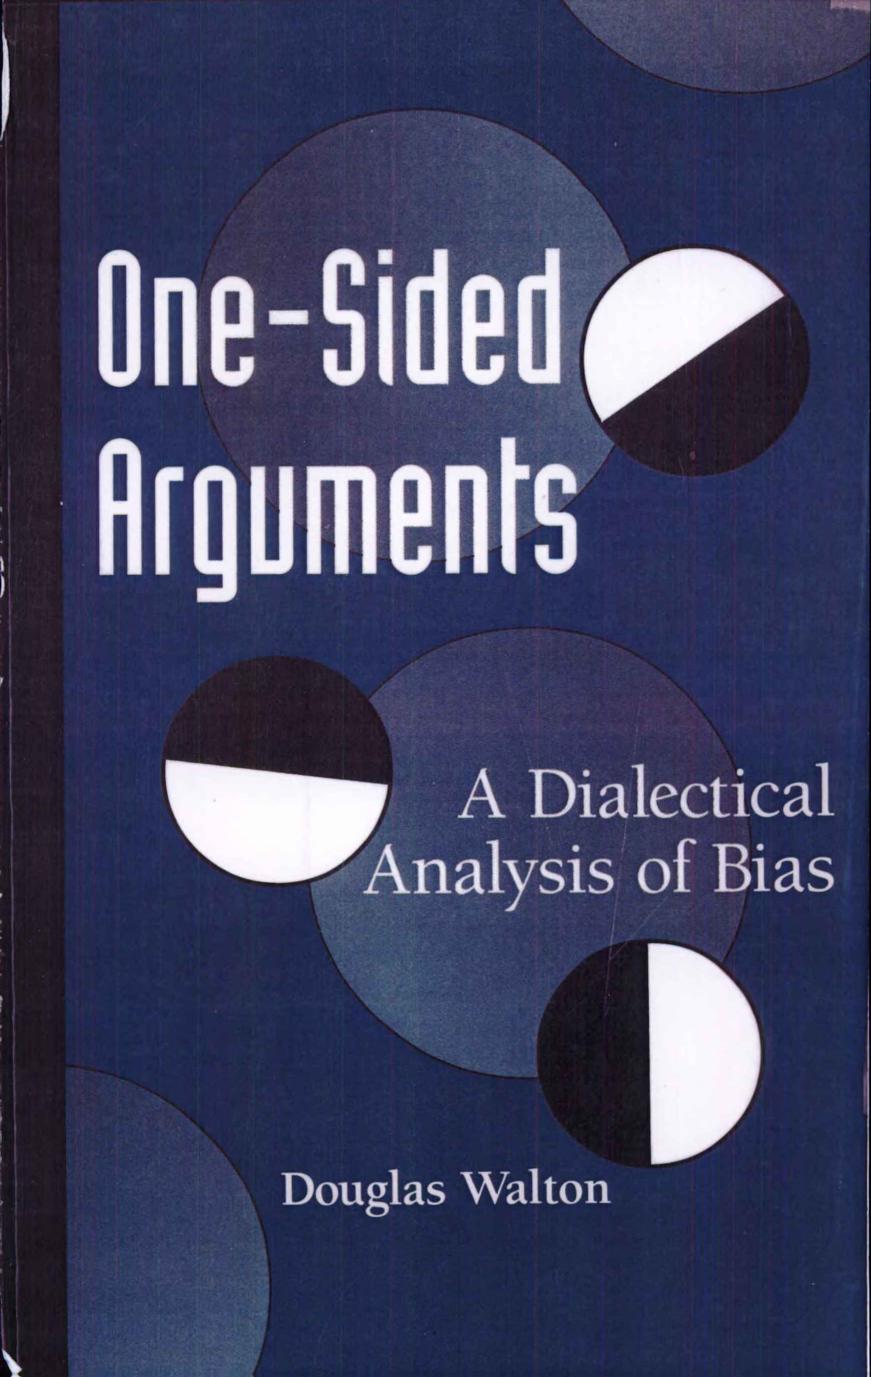 One-Sided Arguments: A Dialectical Analysis of Bias